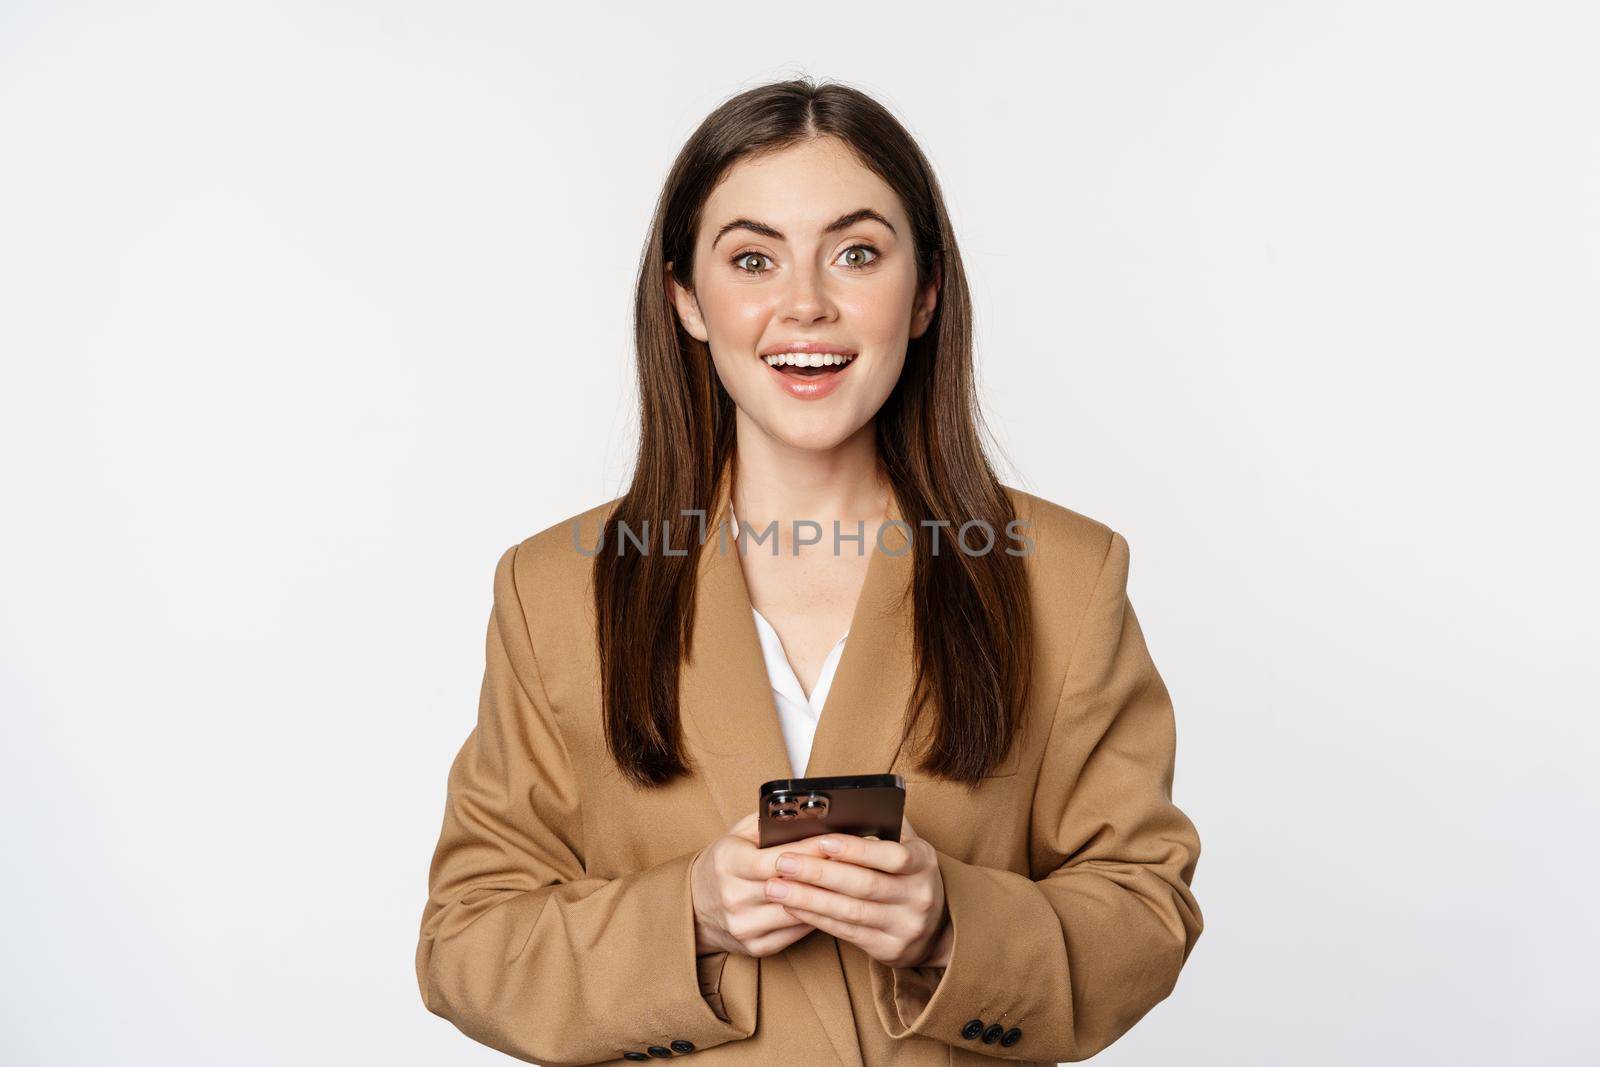 Smiling businesswoman using smartphone, app on mobile phone, standing over white background.